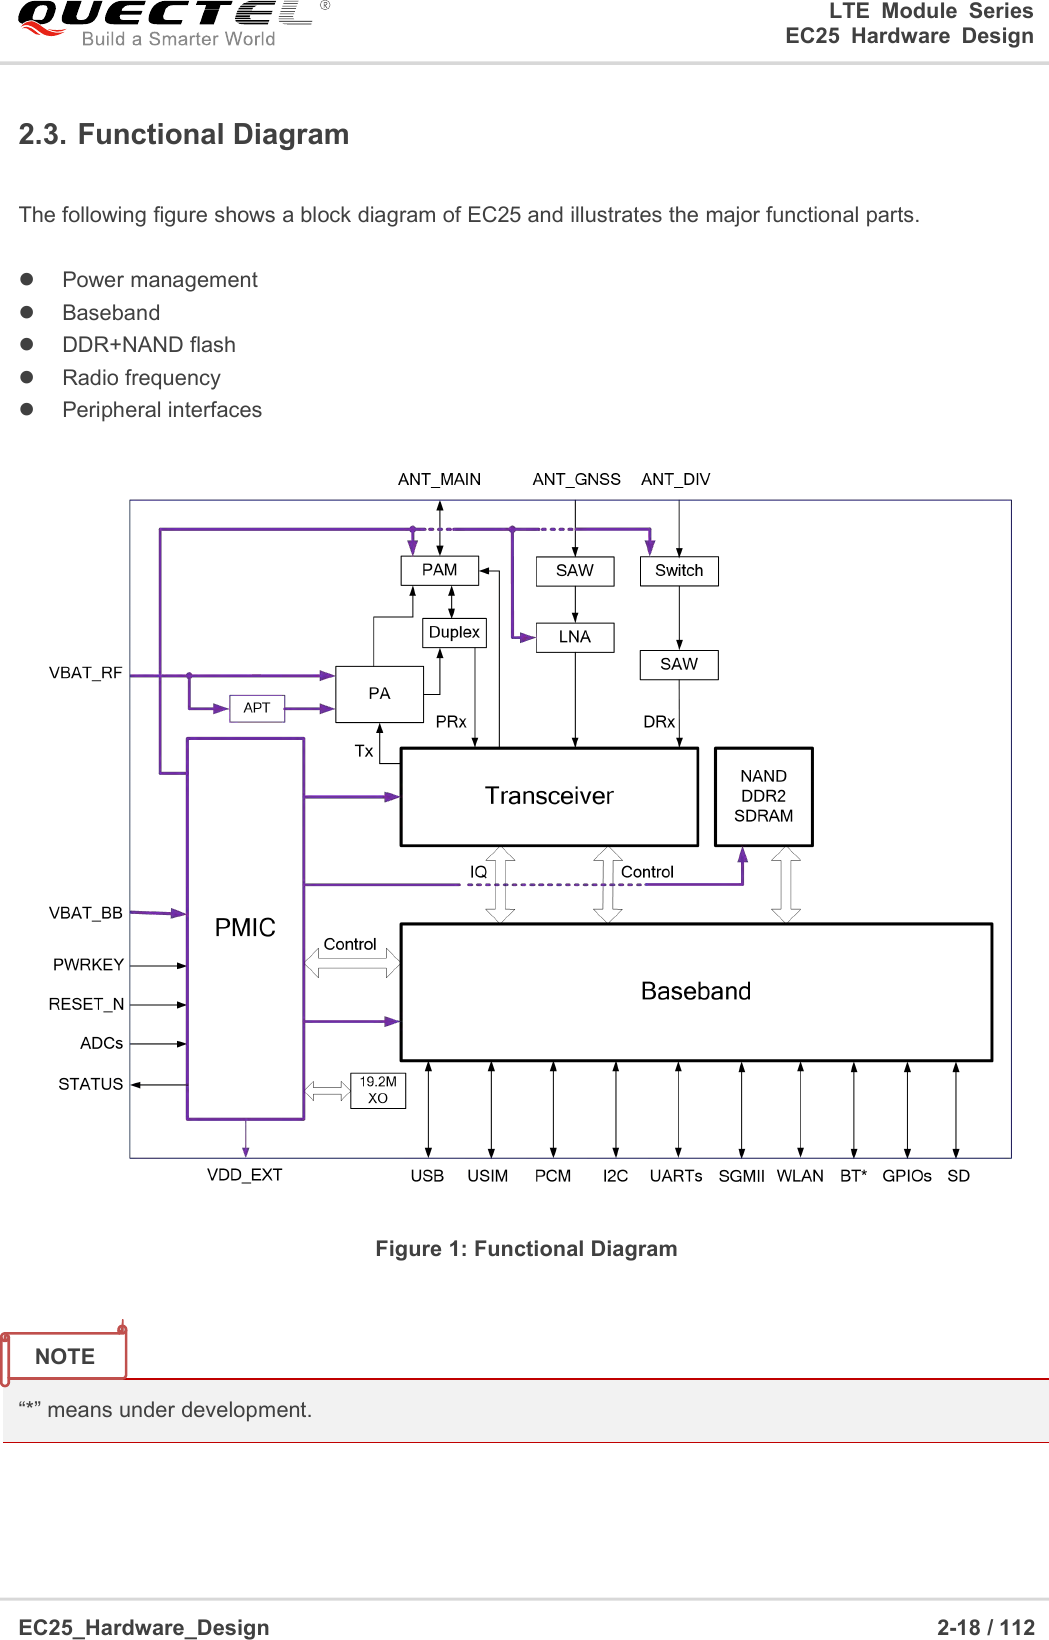 LTE Module SeriesEC25 Hardware DesignEC25_Hardware_Design 2-18 / 1122.3. Functional DiagramThe following figure shows a block diagram of EC25 and illustrates the major functional parts.Power managementBasebandDDR+NAND flashRadio frequencyPeripheral interfacesFigure 1: Functional Diagram“*” means under development.NOTE